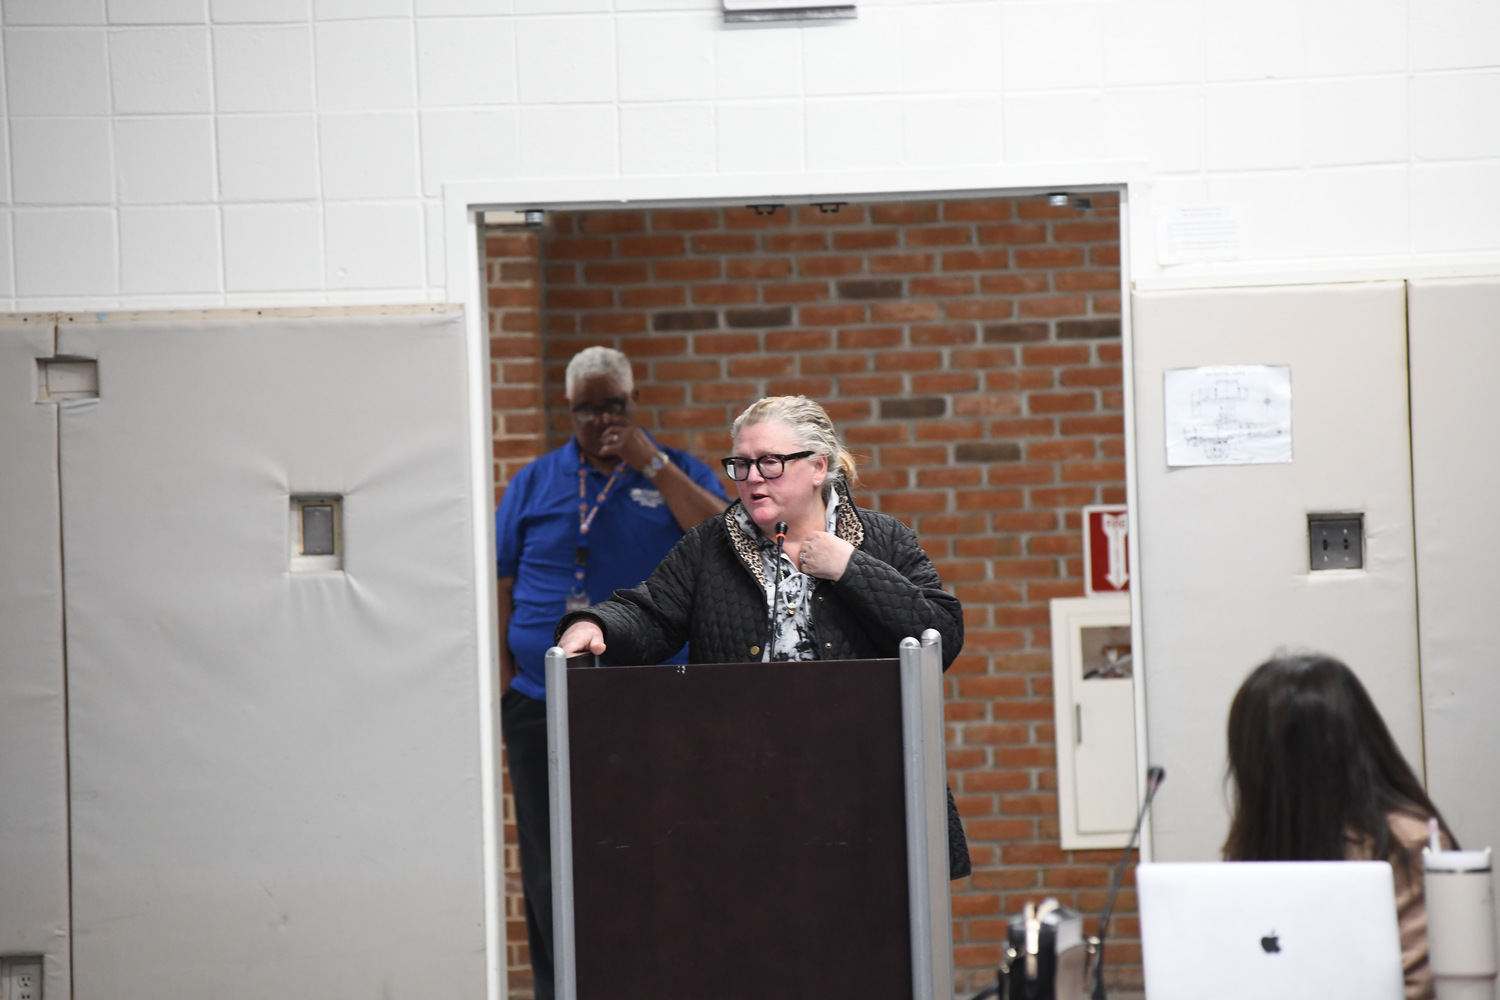 A parent voices her concerns about the appointment of Dr. Fatima Morrell as the next superintendent of schools at the Southampton Union Free School District. DOUG KUNTZ